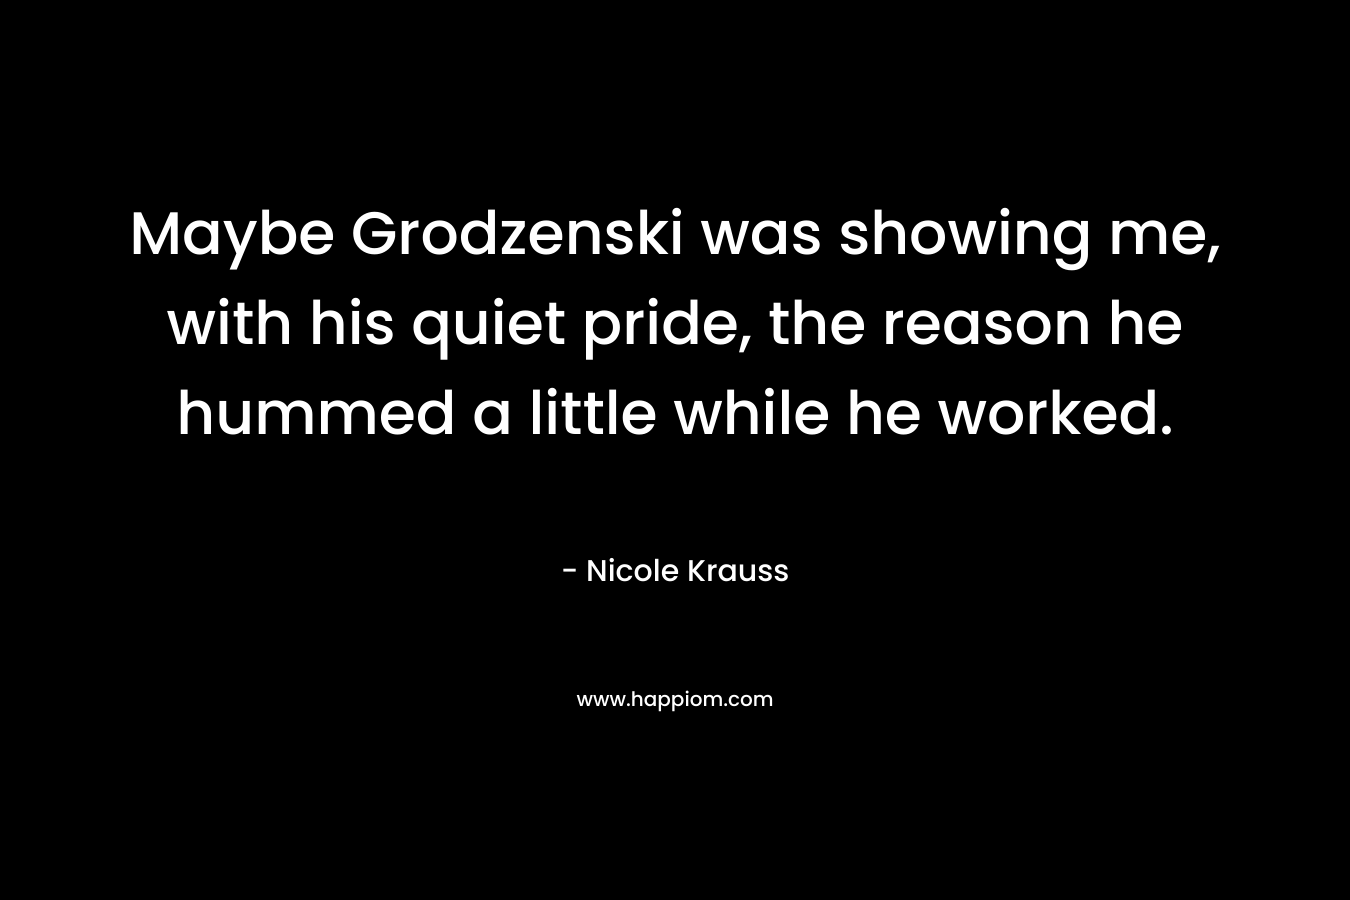 Maybe Grodzenski was showing me, with his quiet pride, the reason he hummed a little while he worked. – Nicole Krauss